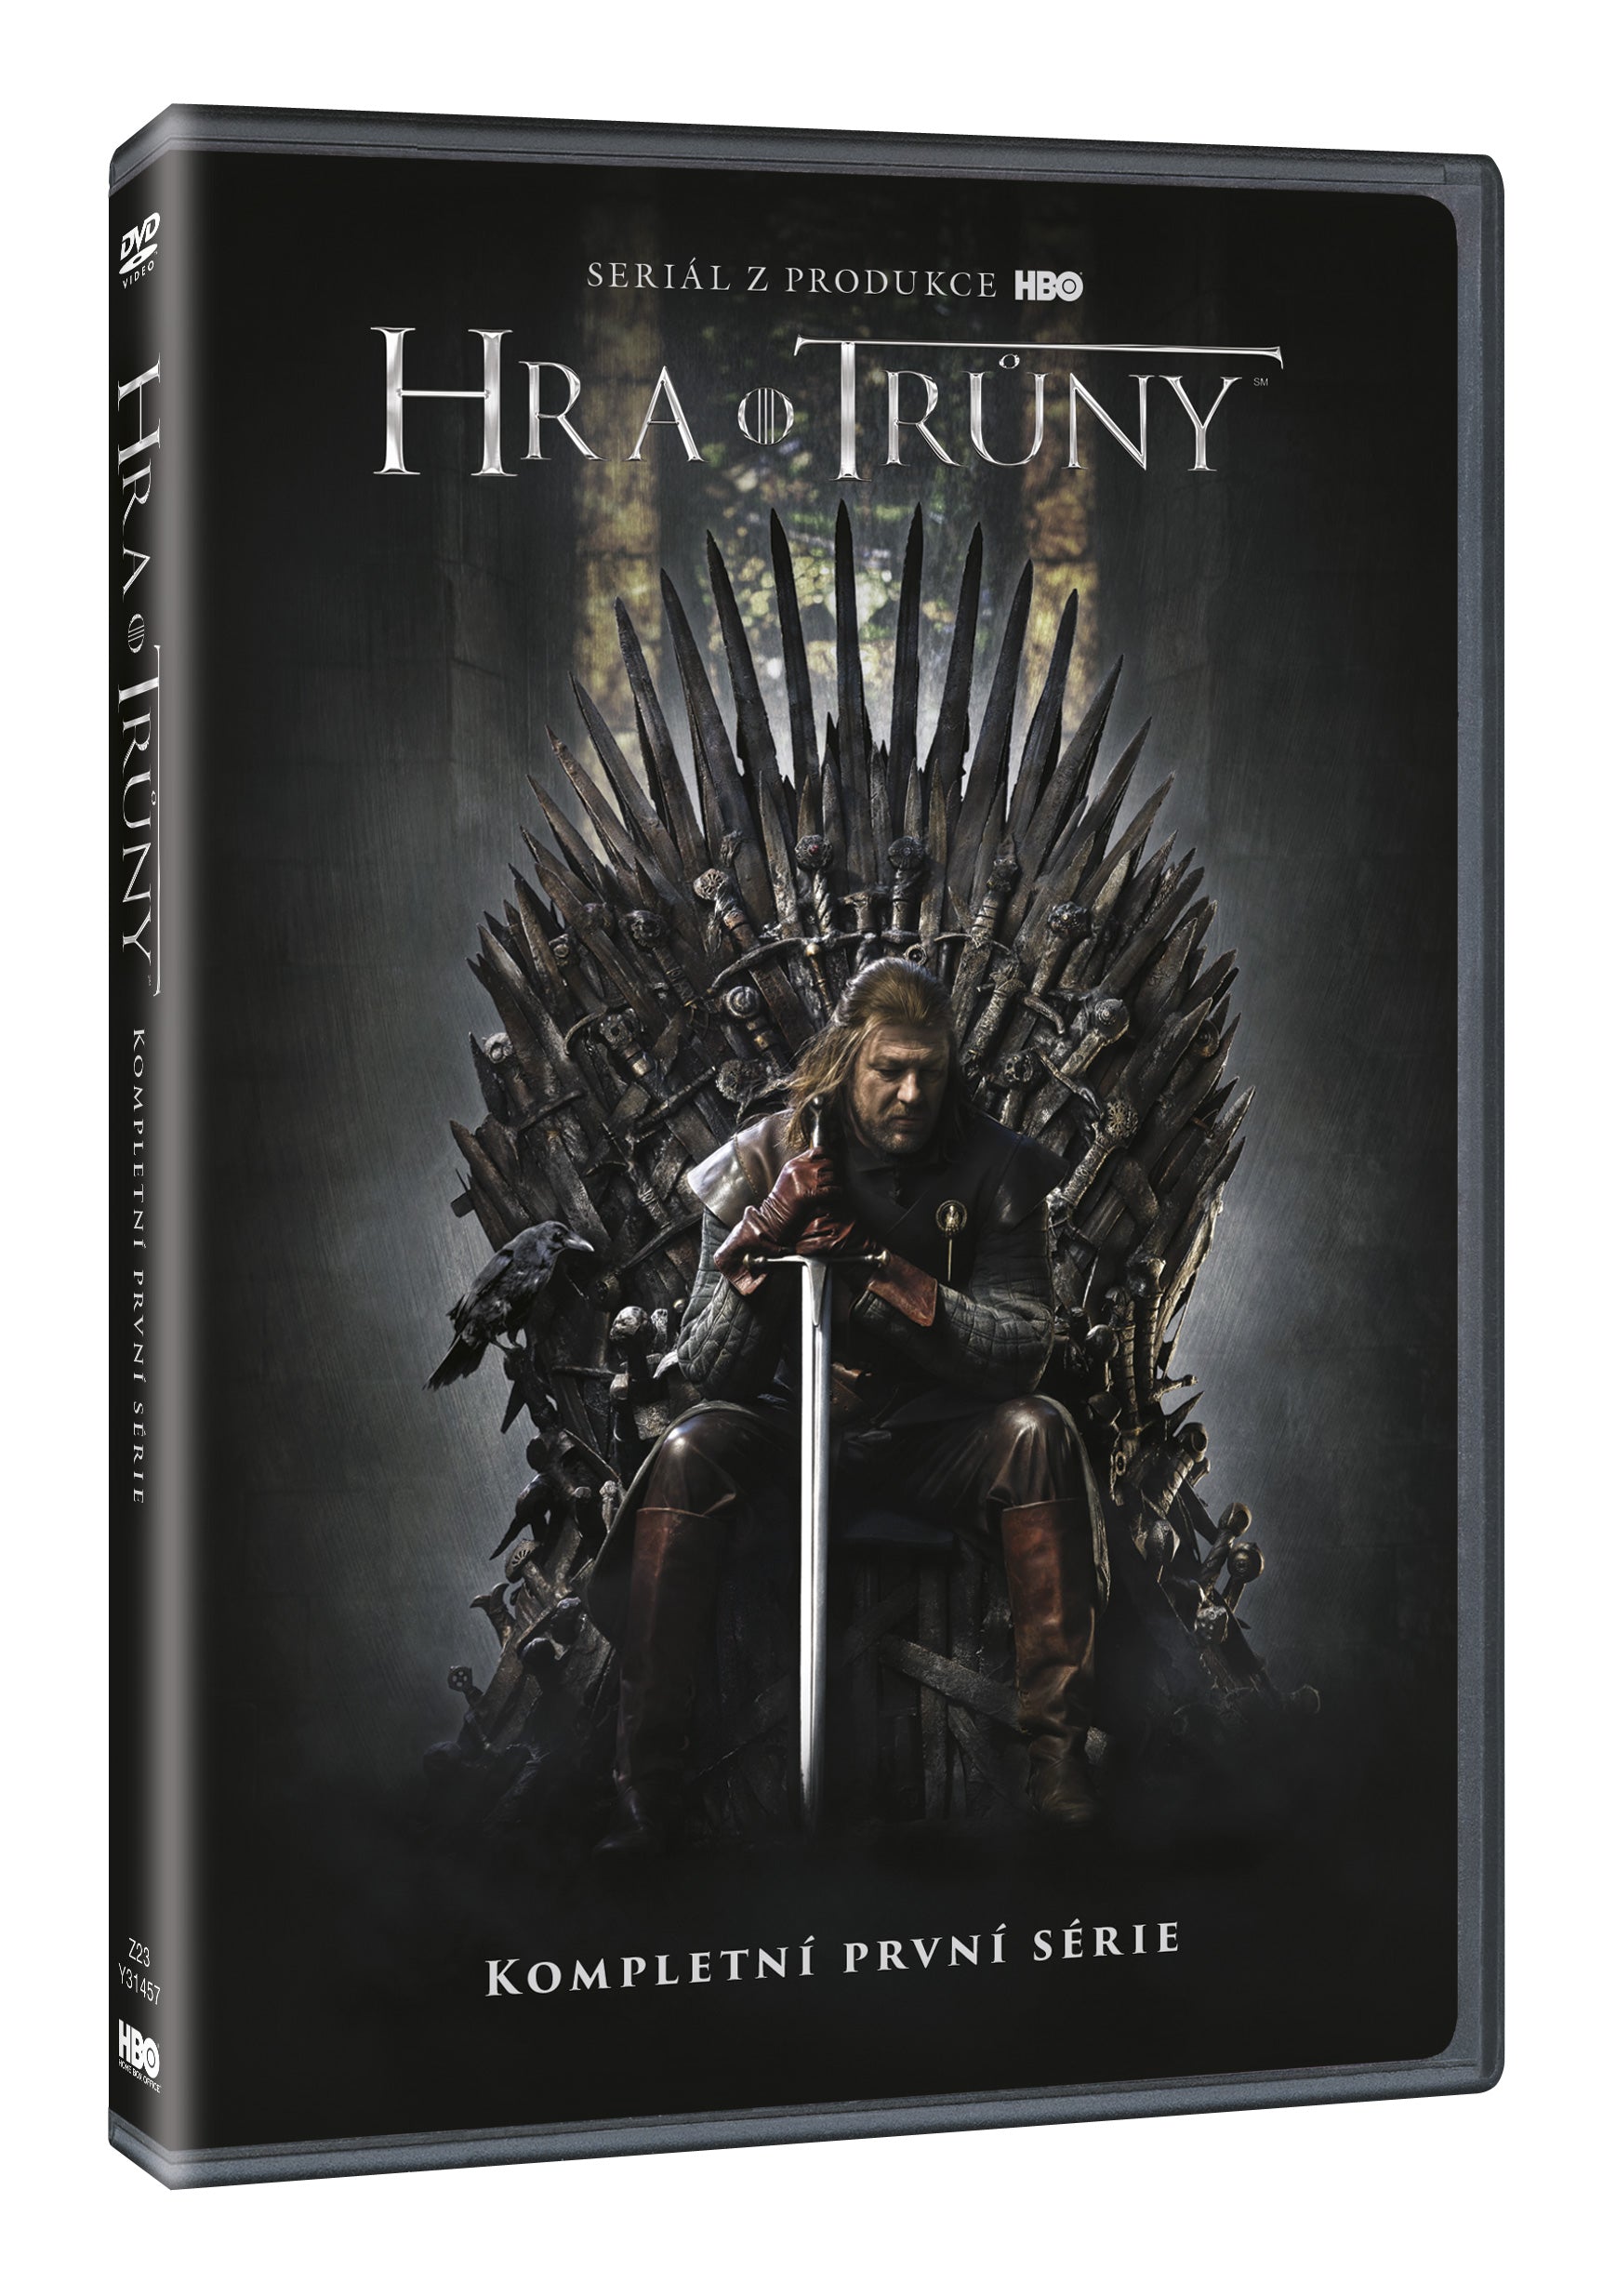 Hra o trony 1. Serie 5DVD - Multipack / Game of Thrones Staffel 1